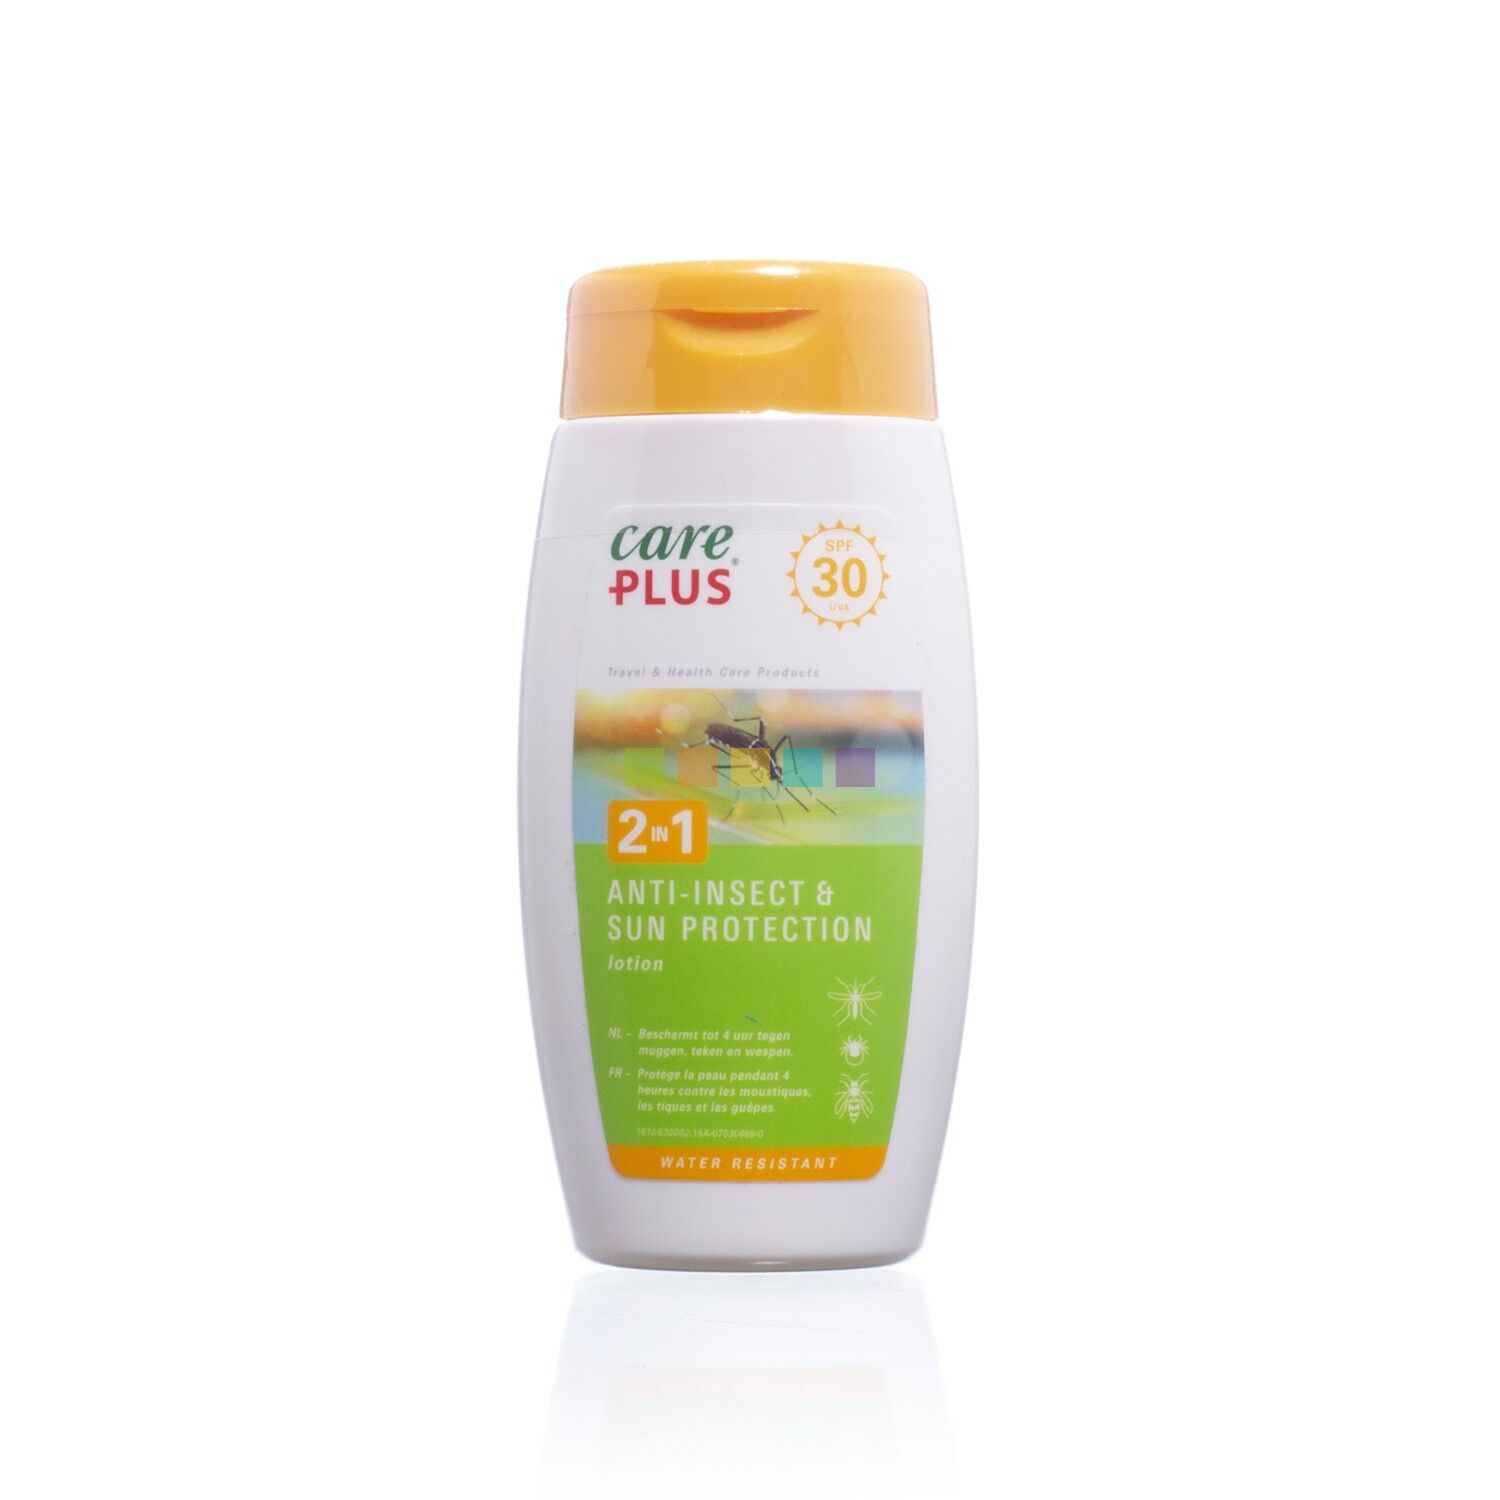 Care Plus 2in1 Anti-Insect & Sun Protection Lotion SPF30 - Protección contra insectos